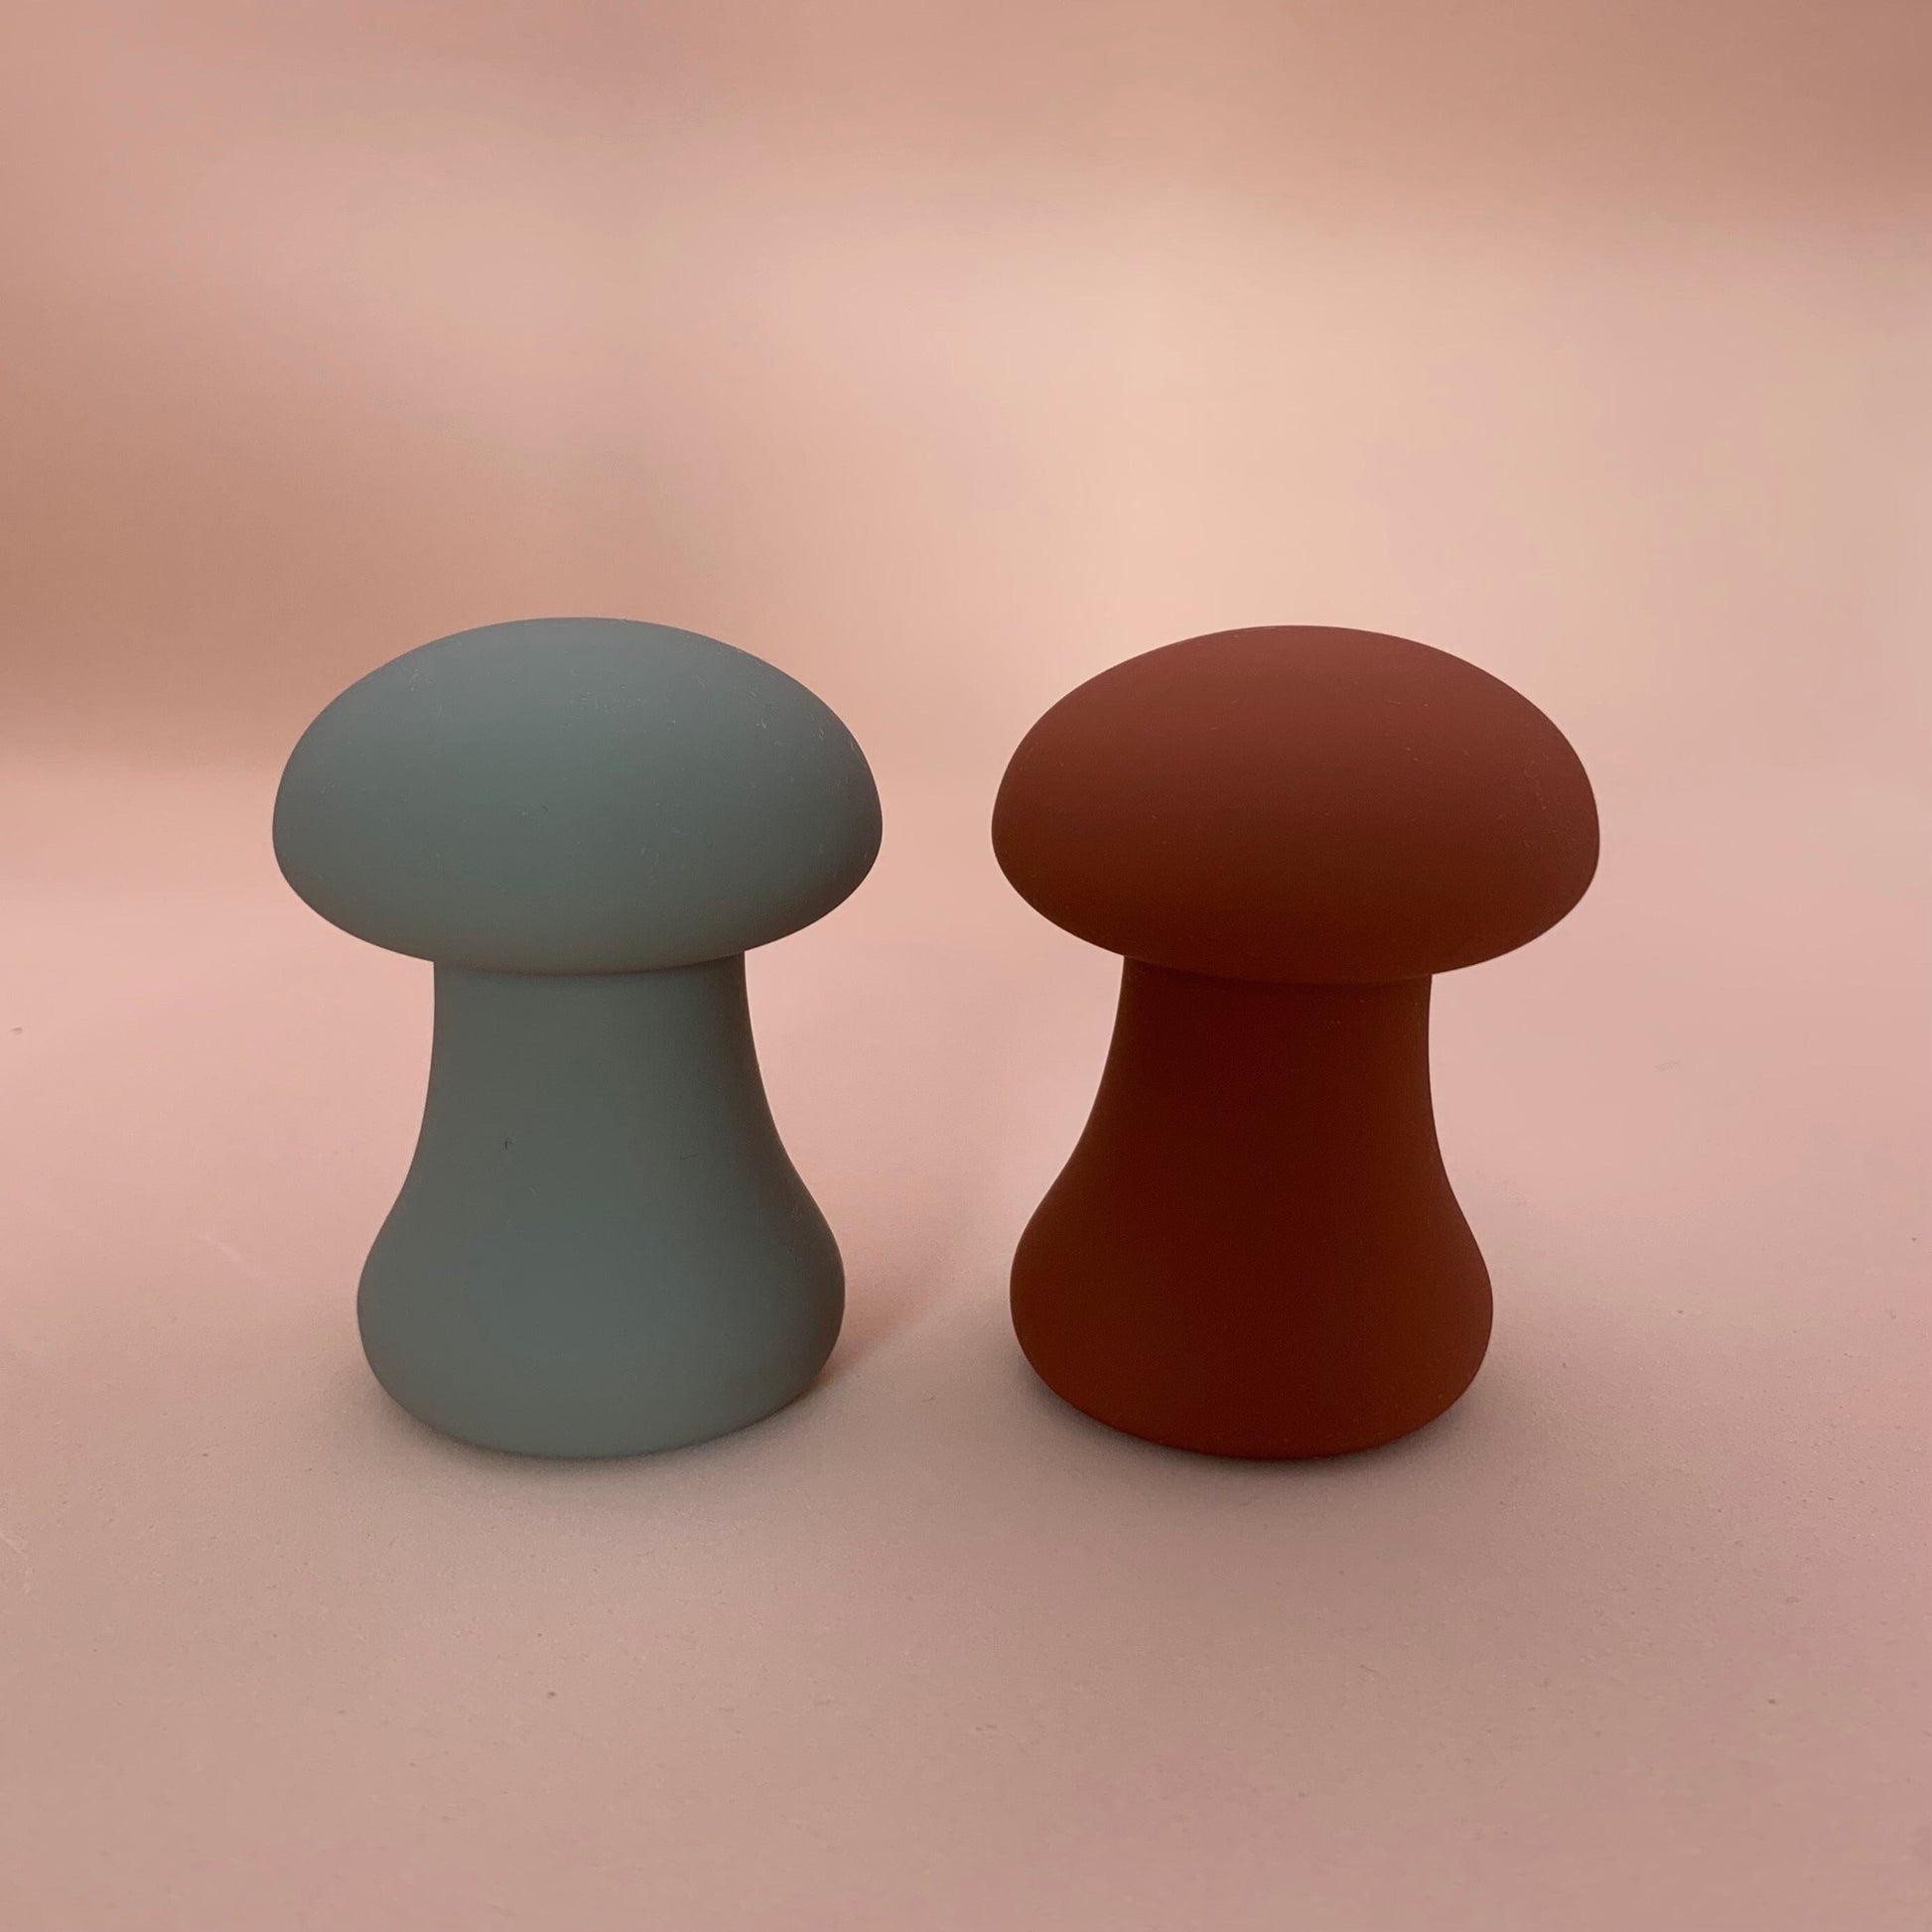 two mushroom shaped clitoral mini vibrators standing side by side